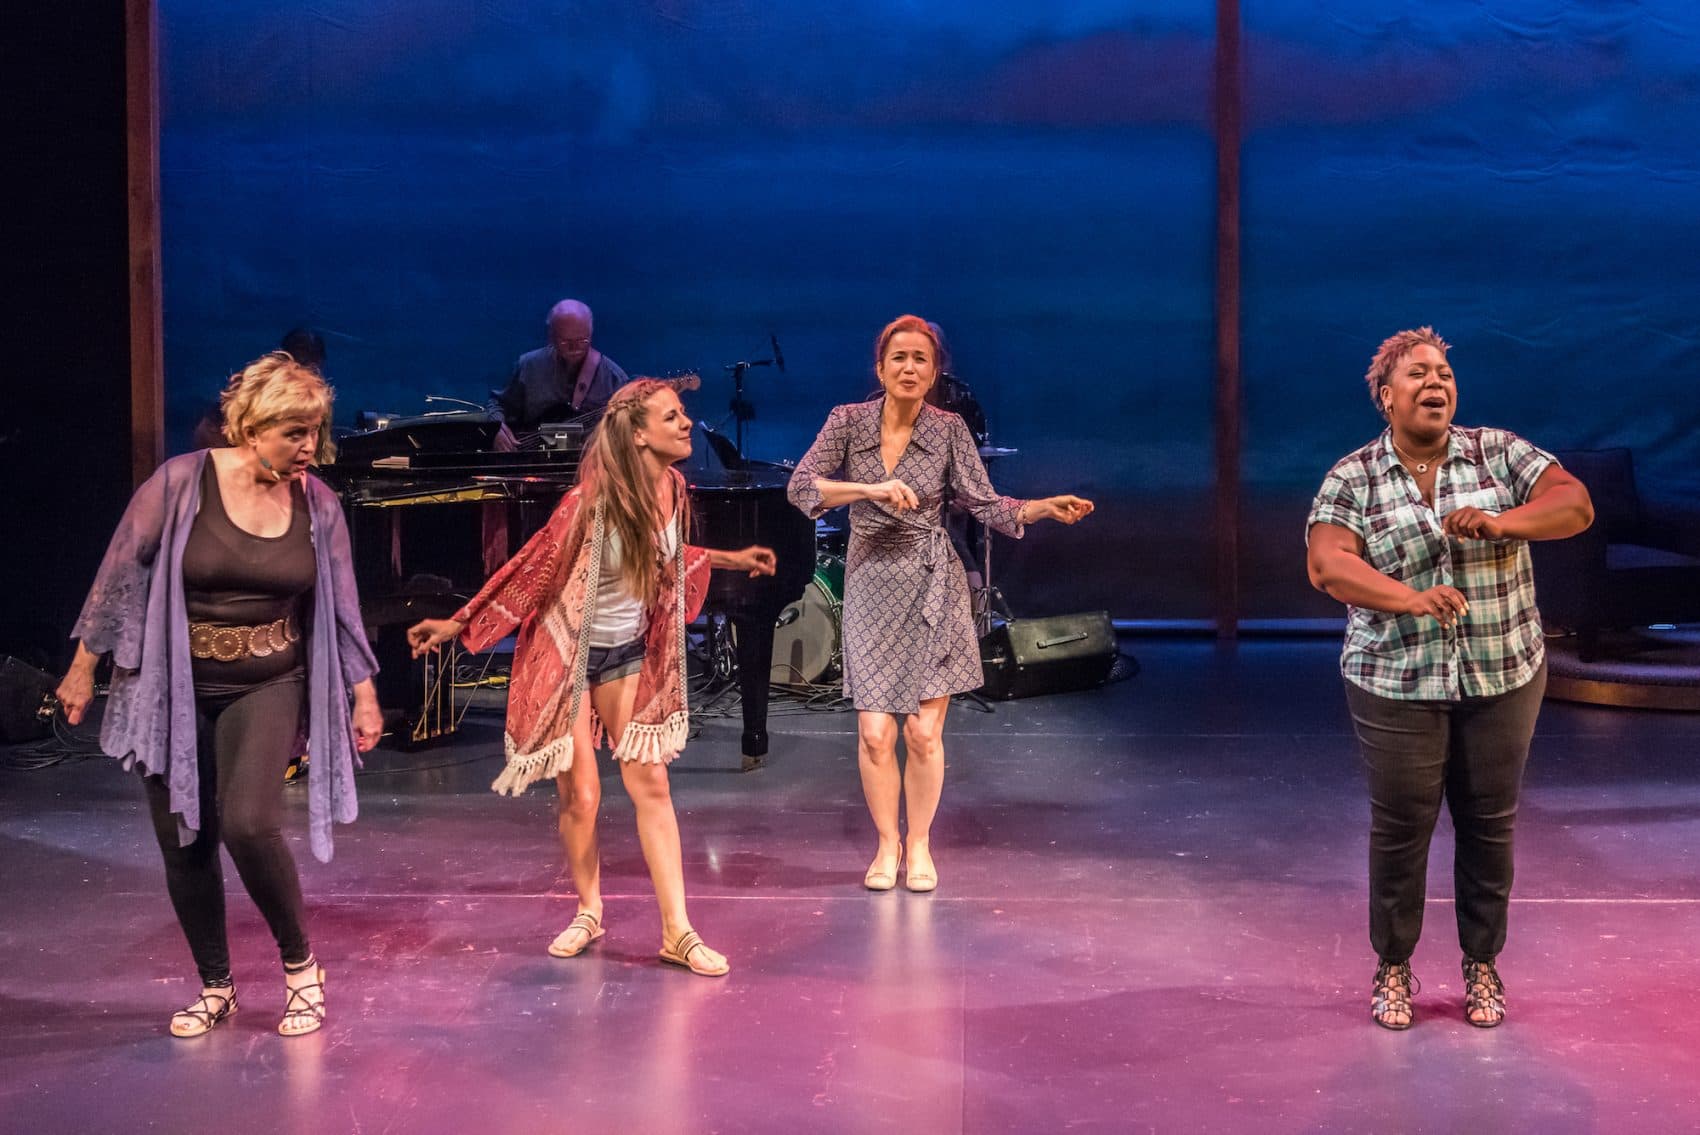 Sally Mayes, Charity Farrell, Michelle Duffy and Lacretta in &quot;Unexpected Joy&quot; at Wellfleet Harbor Actors Theater. (Courtesy of Michael and Suz Karchmer)